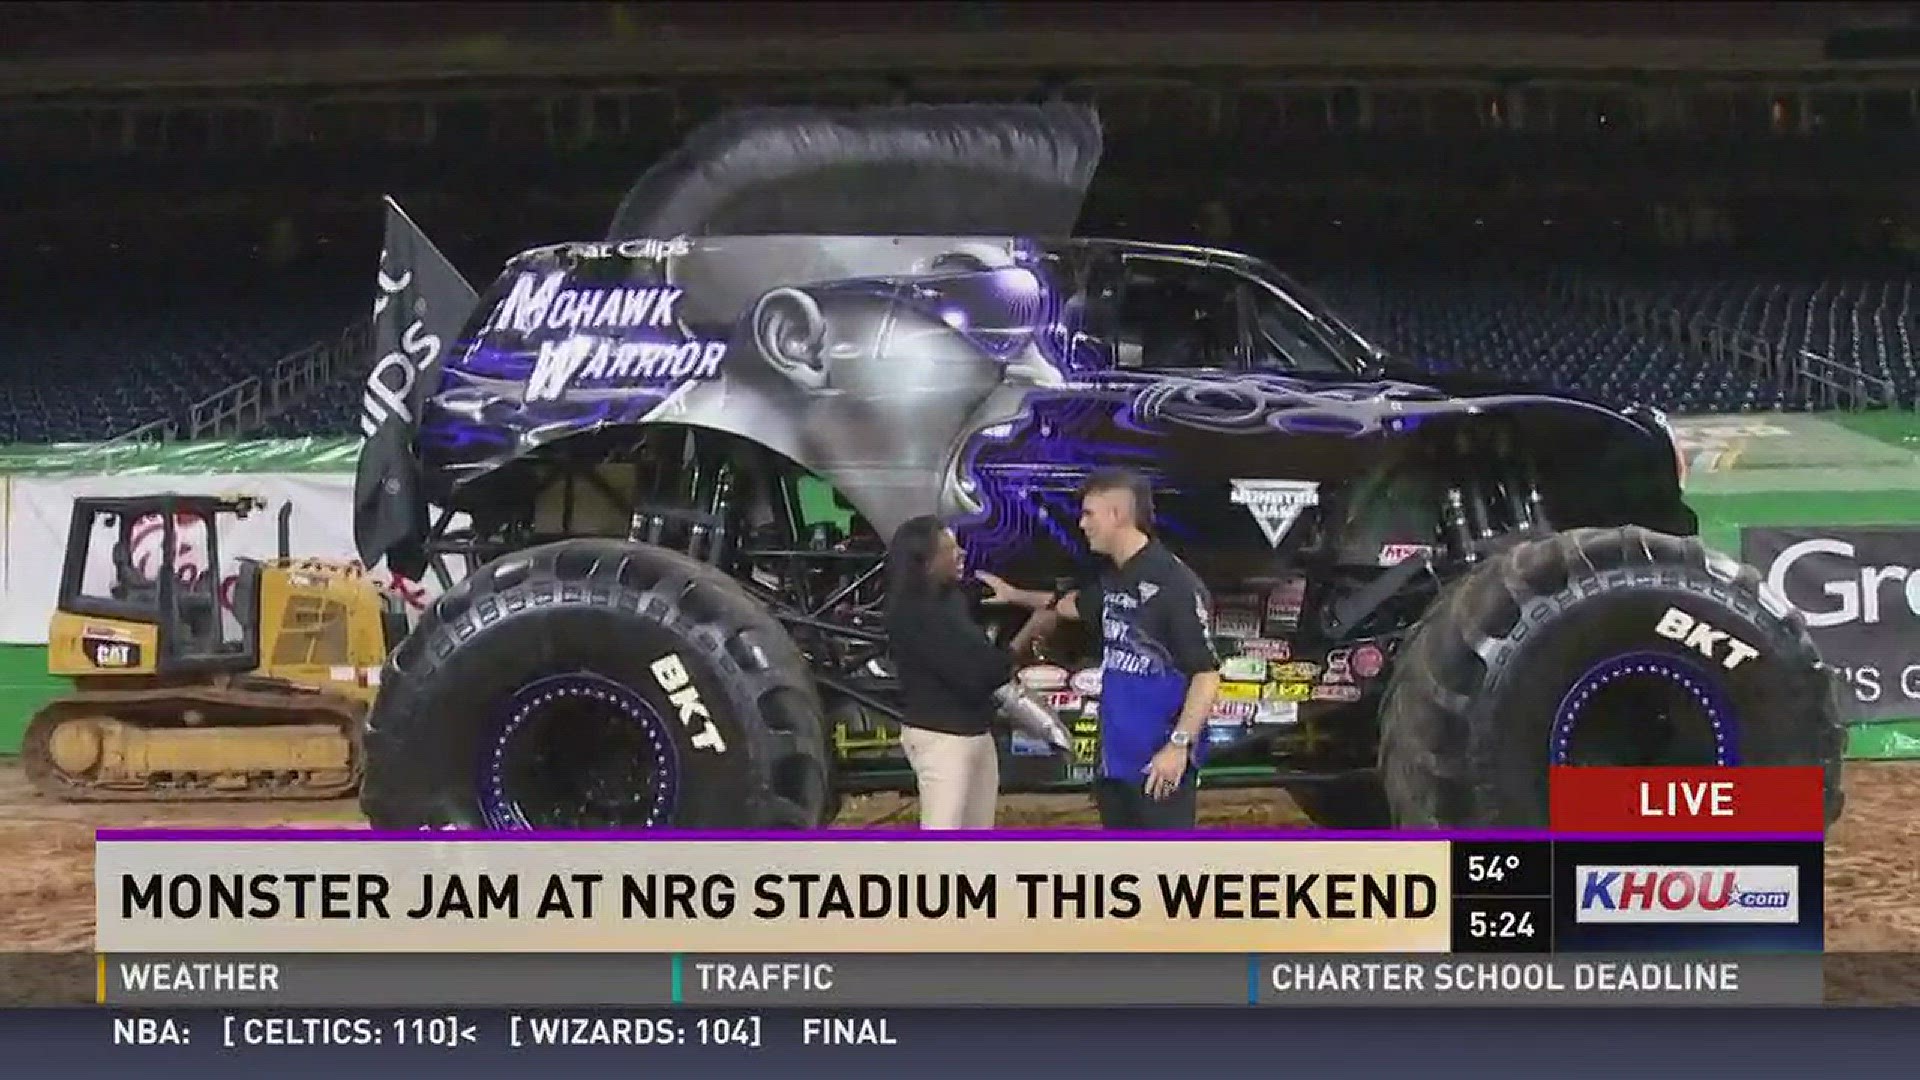 A preview of what's to come at Monster Jam at NRG Stadium this weekend.